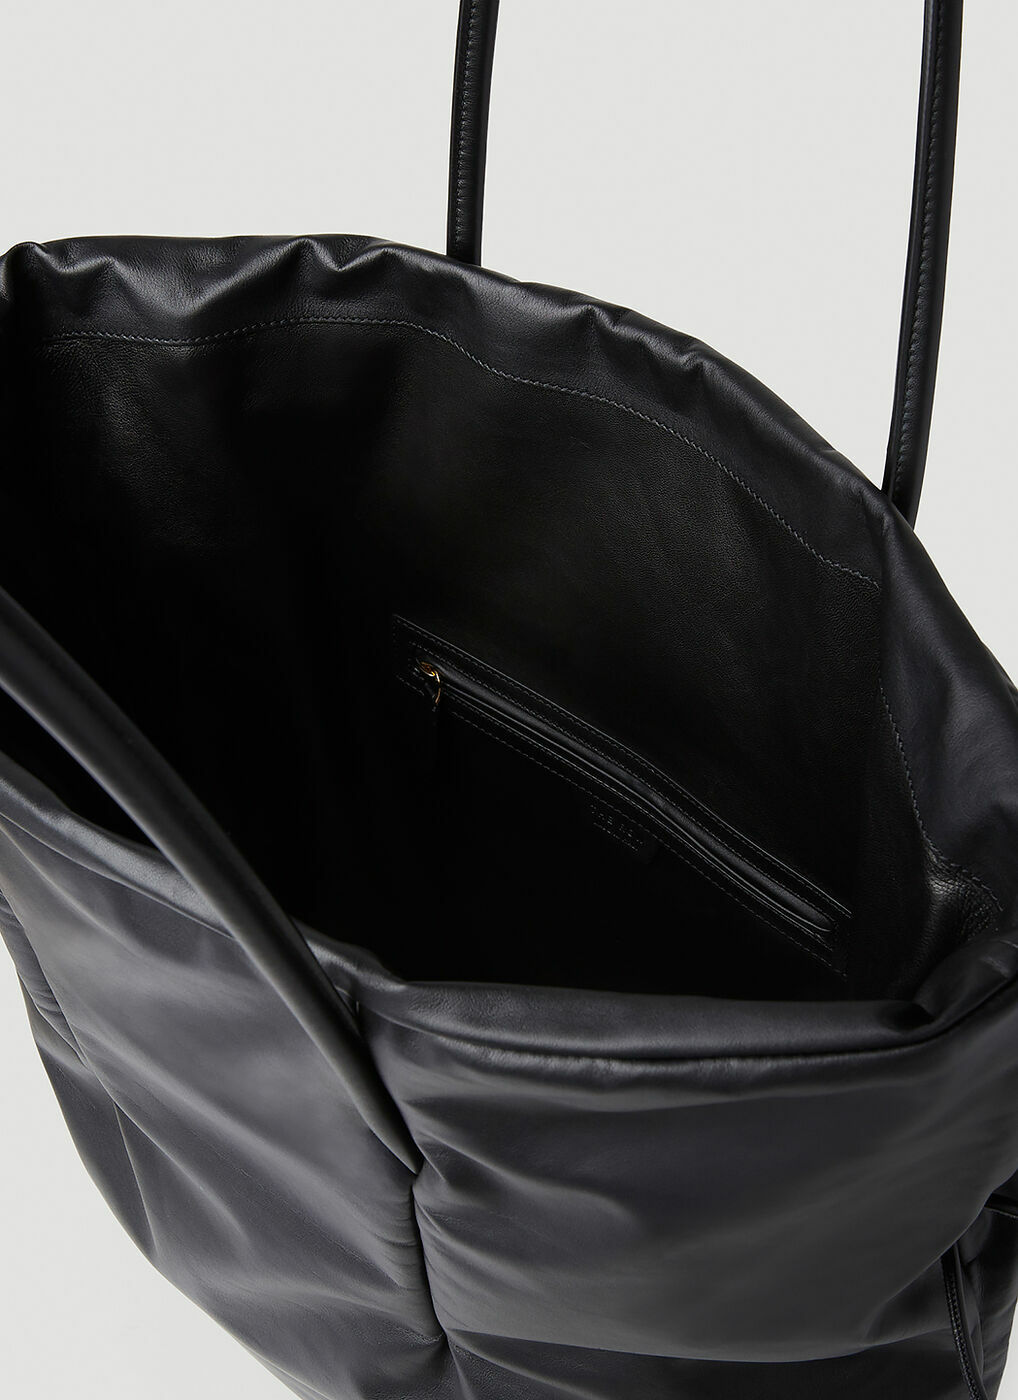 The Row - Polly Tote Bag in Black The Row